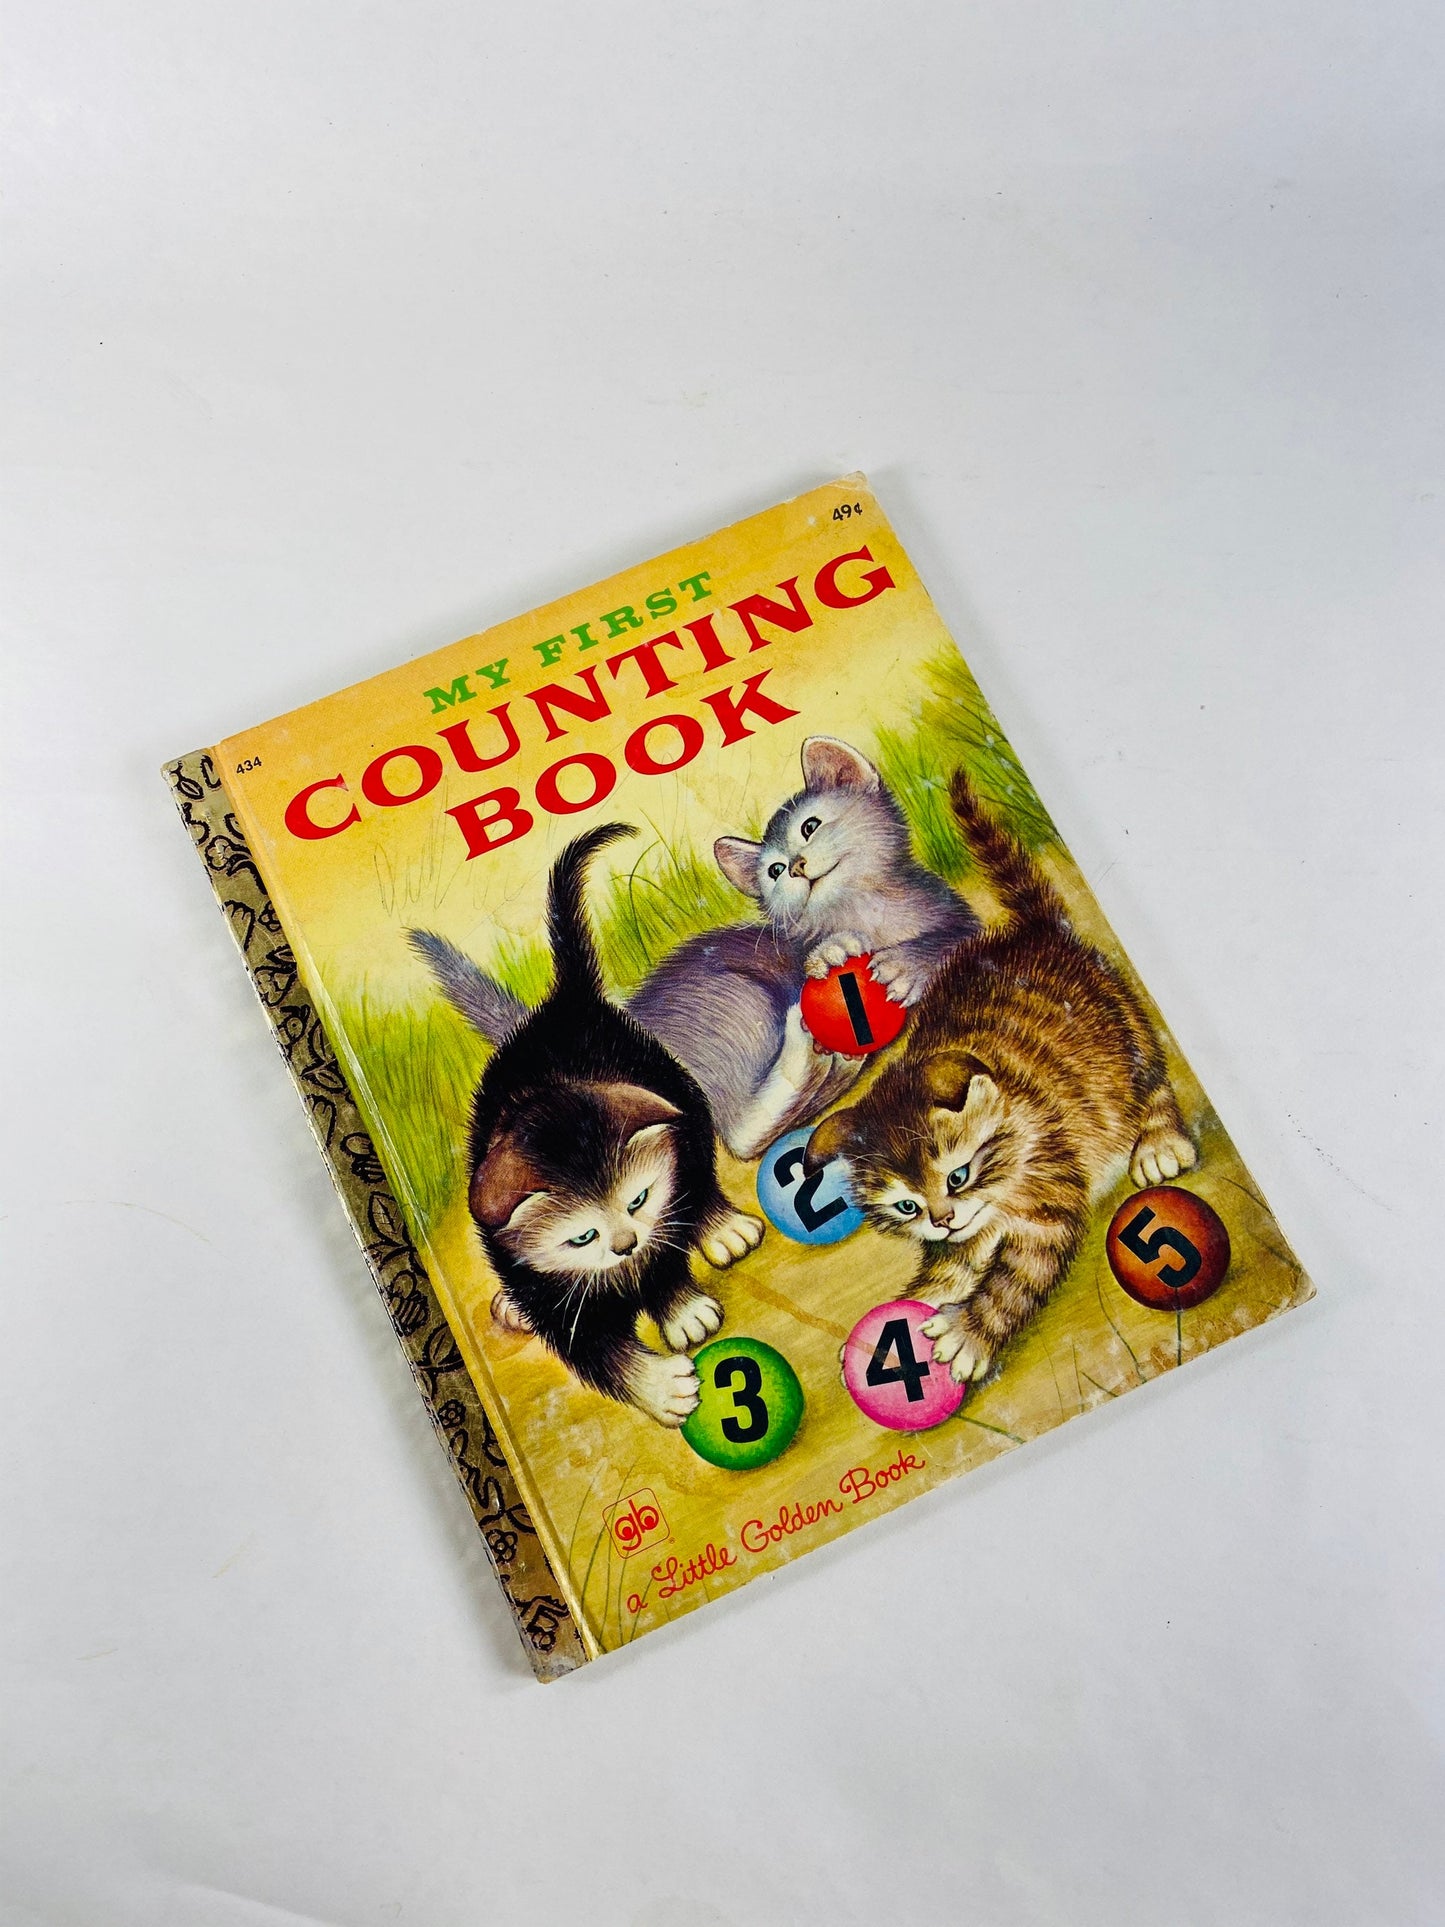 1985 My First Counting Book illustrates by Garth Williams. Little Golden Book. Vintage children's book Lilian Moore